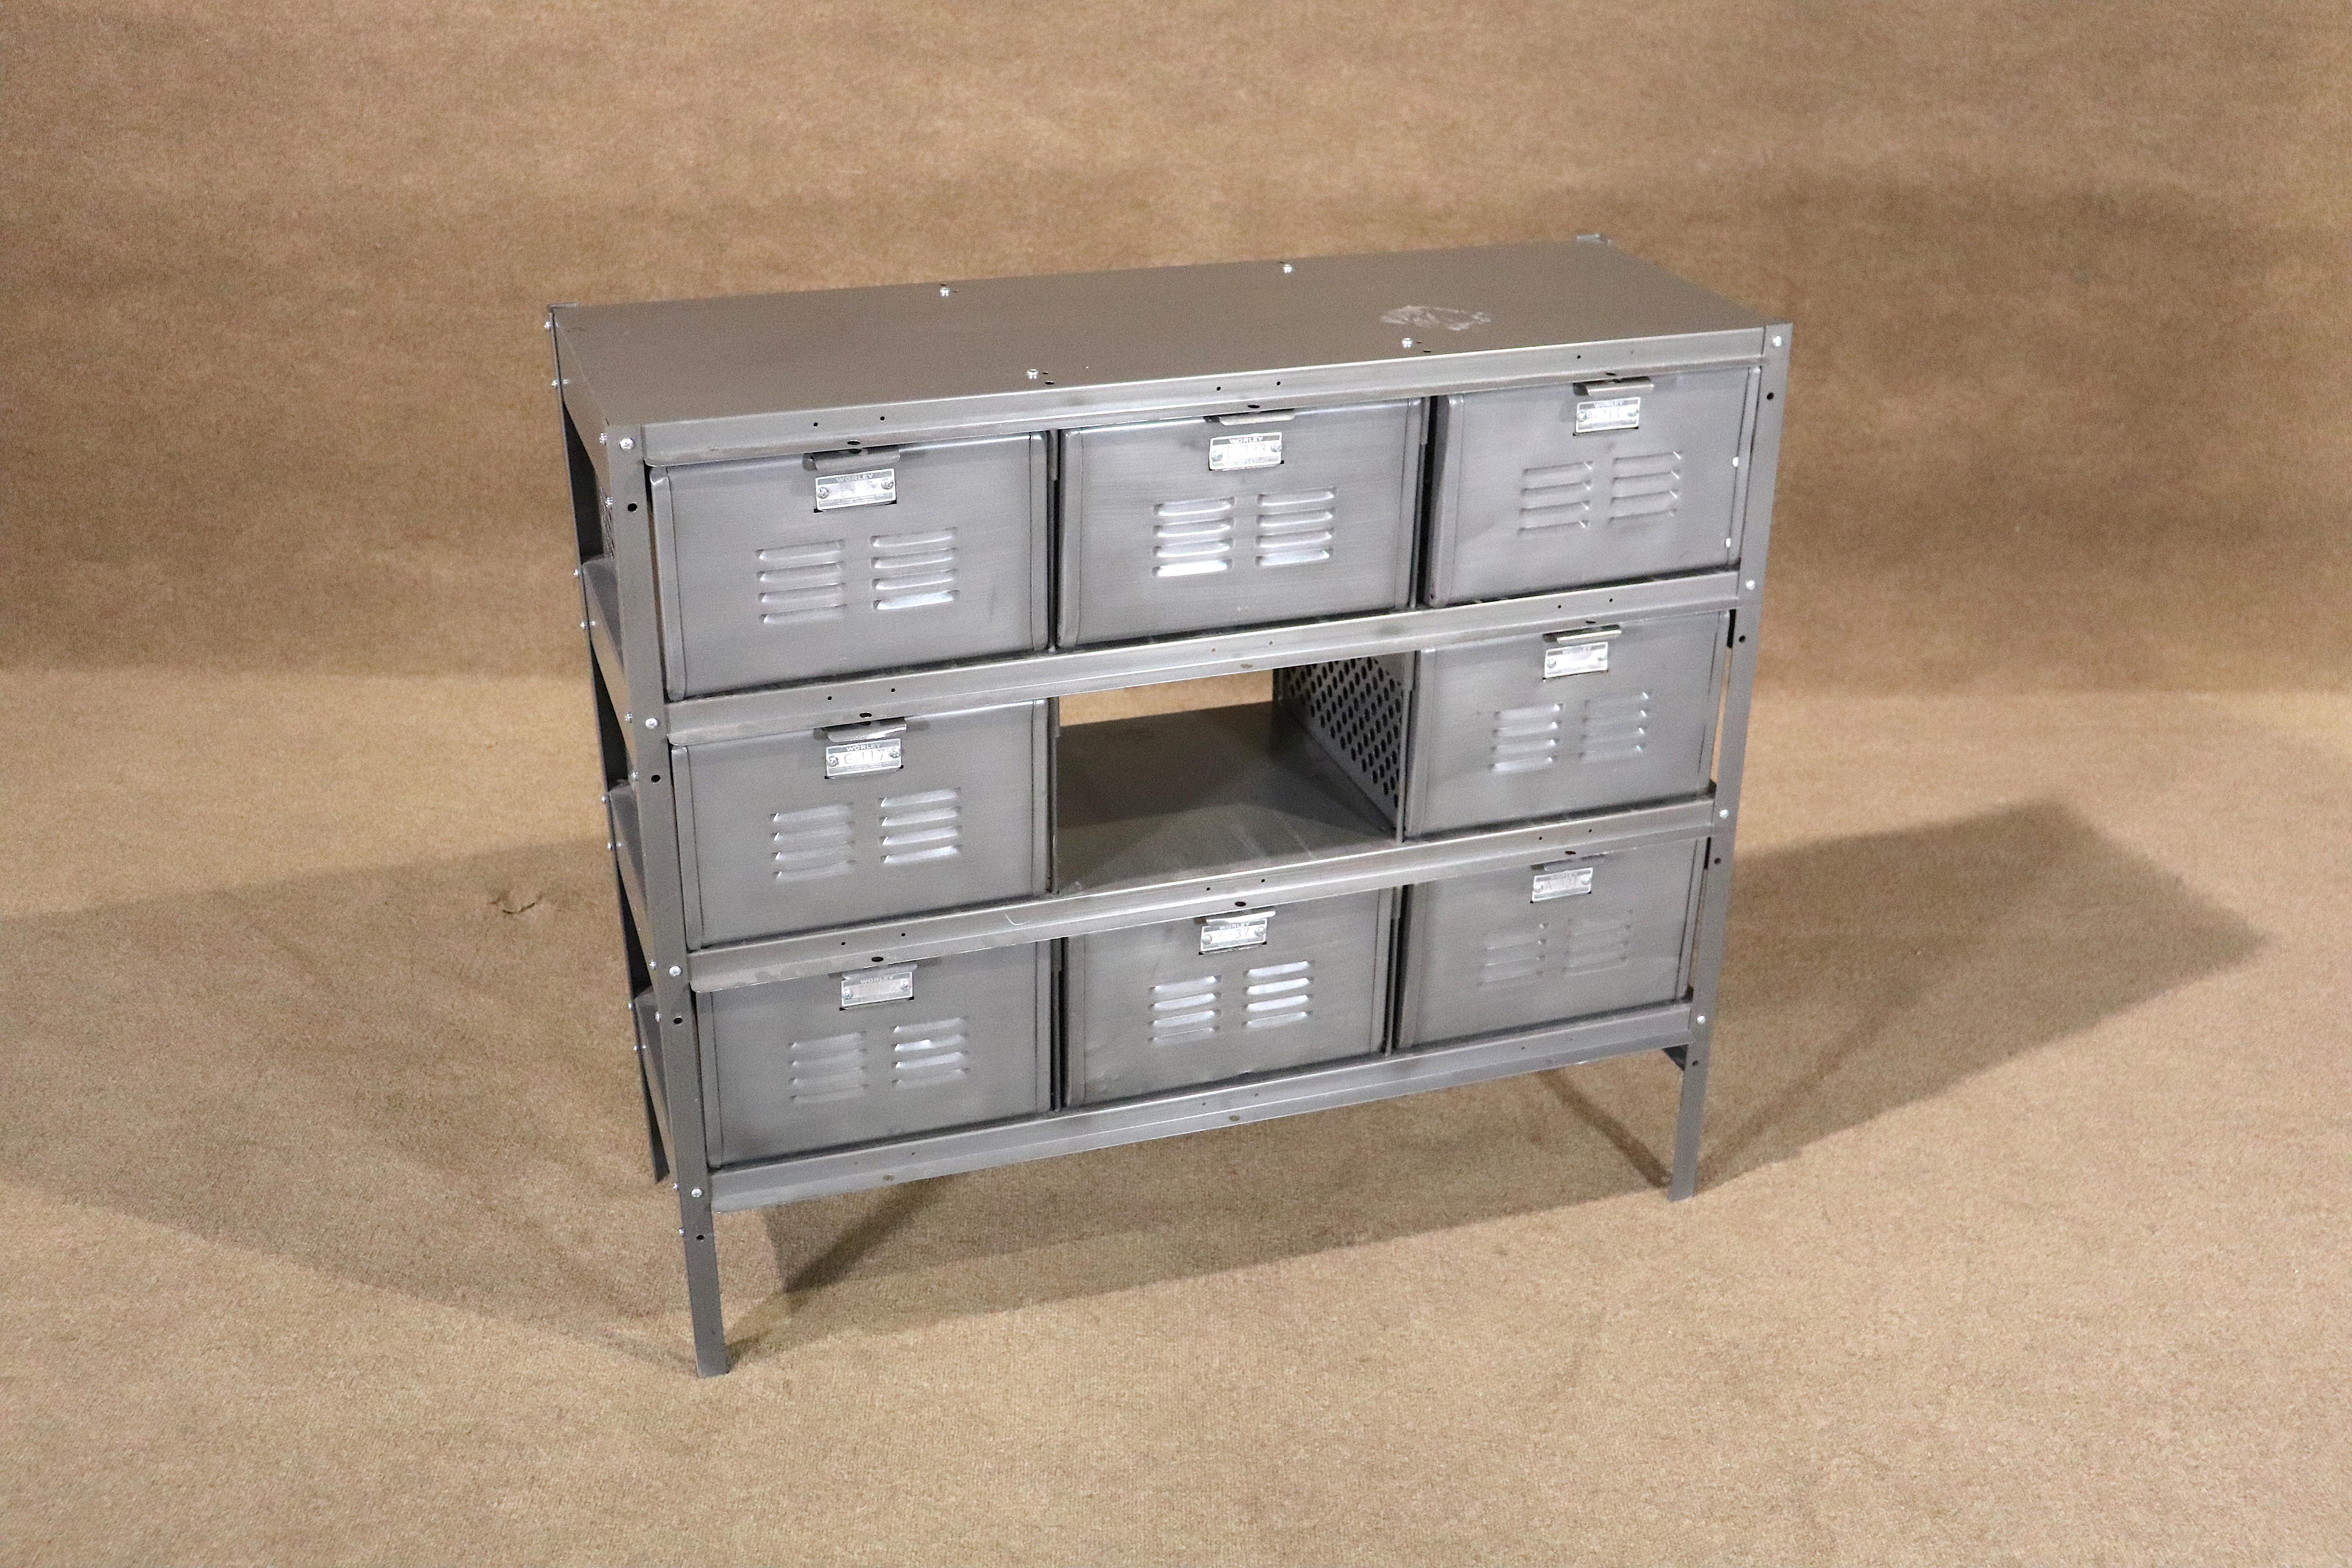 Metal storage locker basket unit. Ideal for storing and locking small items.
Please confirm location NY or NJ